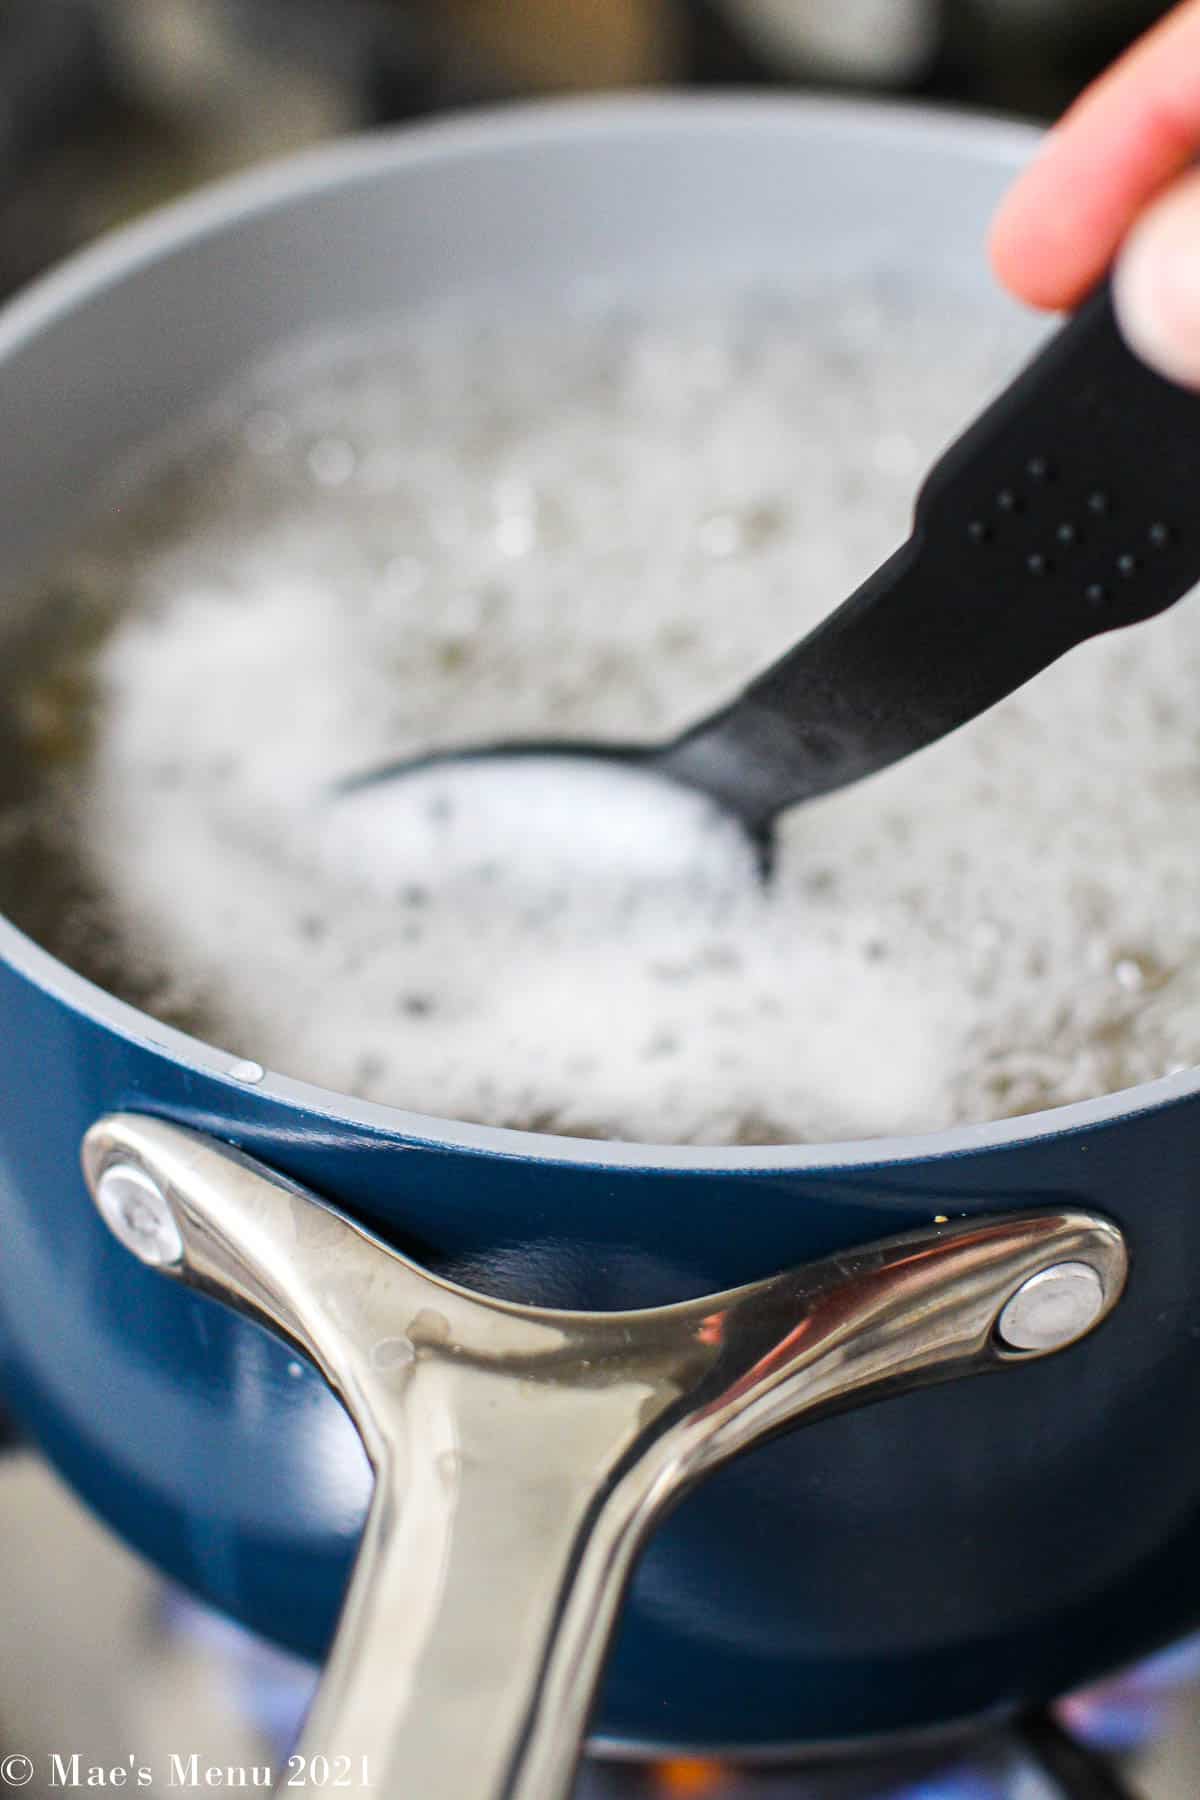 Cooking pasta in a saucepan of water